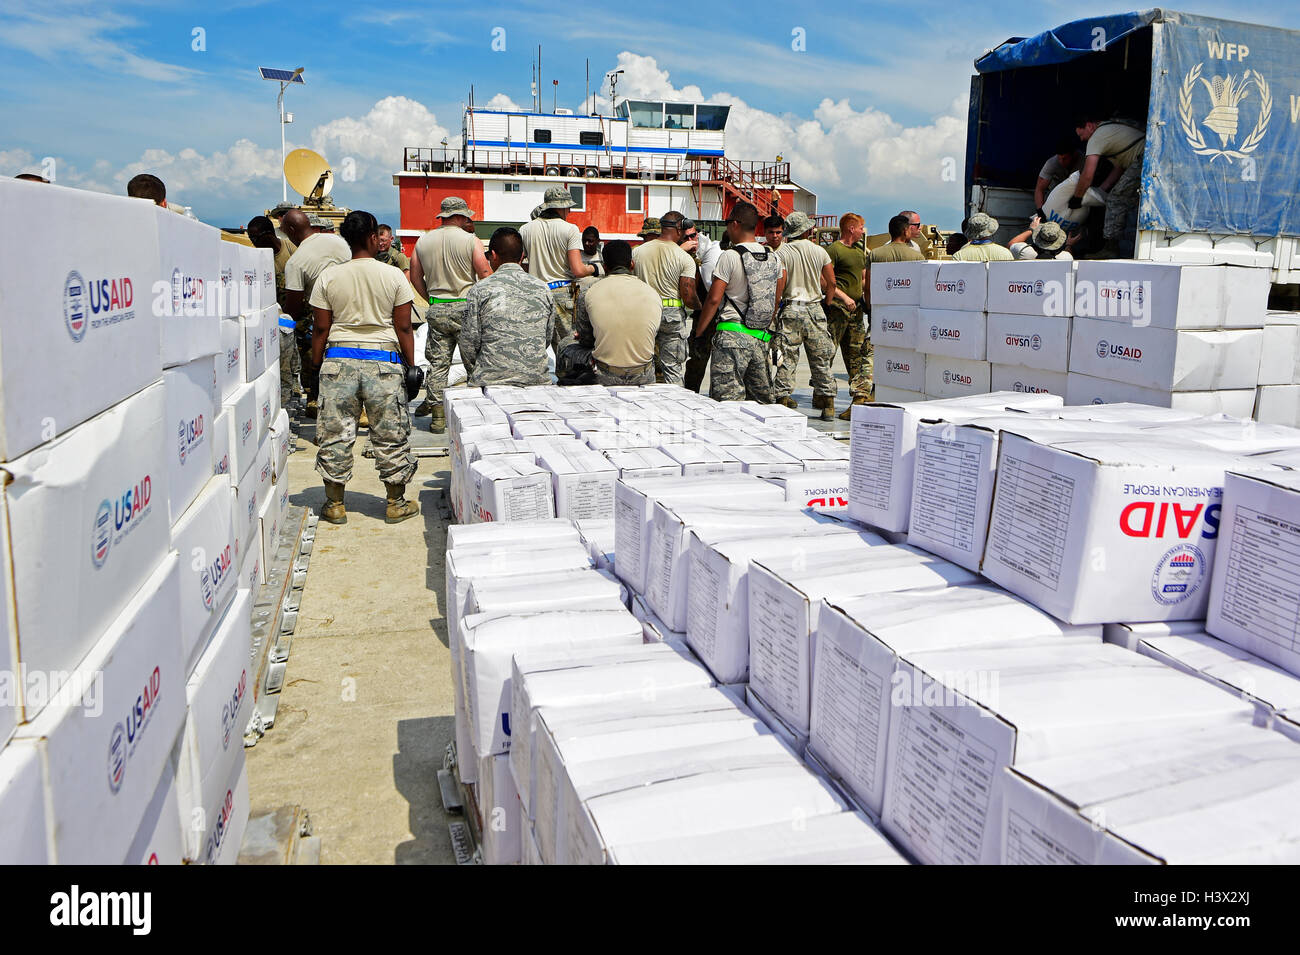 U.S service members unload humanitarian relief supplies from a ship to aid those affected by Hurricane Matthew October 11, 2016 in Port-au-Prince, Haiti. Hurricane Matthew struck Haiti with winds over 140-mph killing 500 people and causing widespread damage. Stock Photo